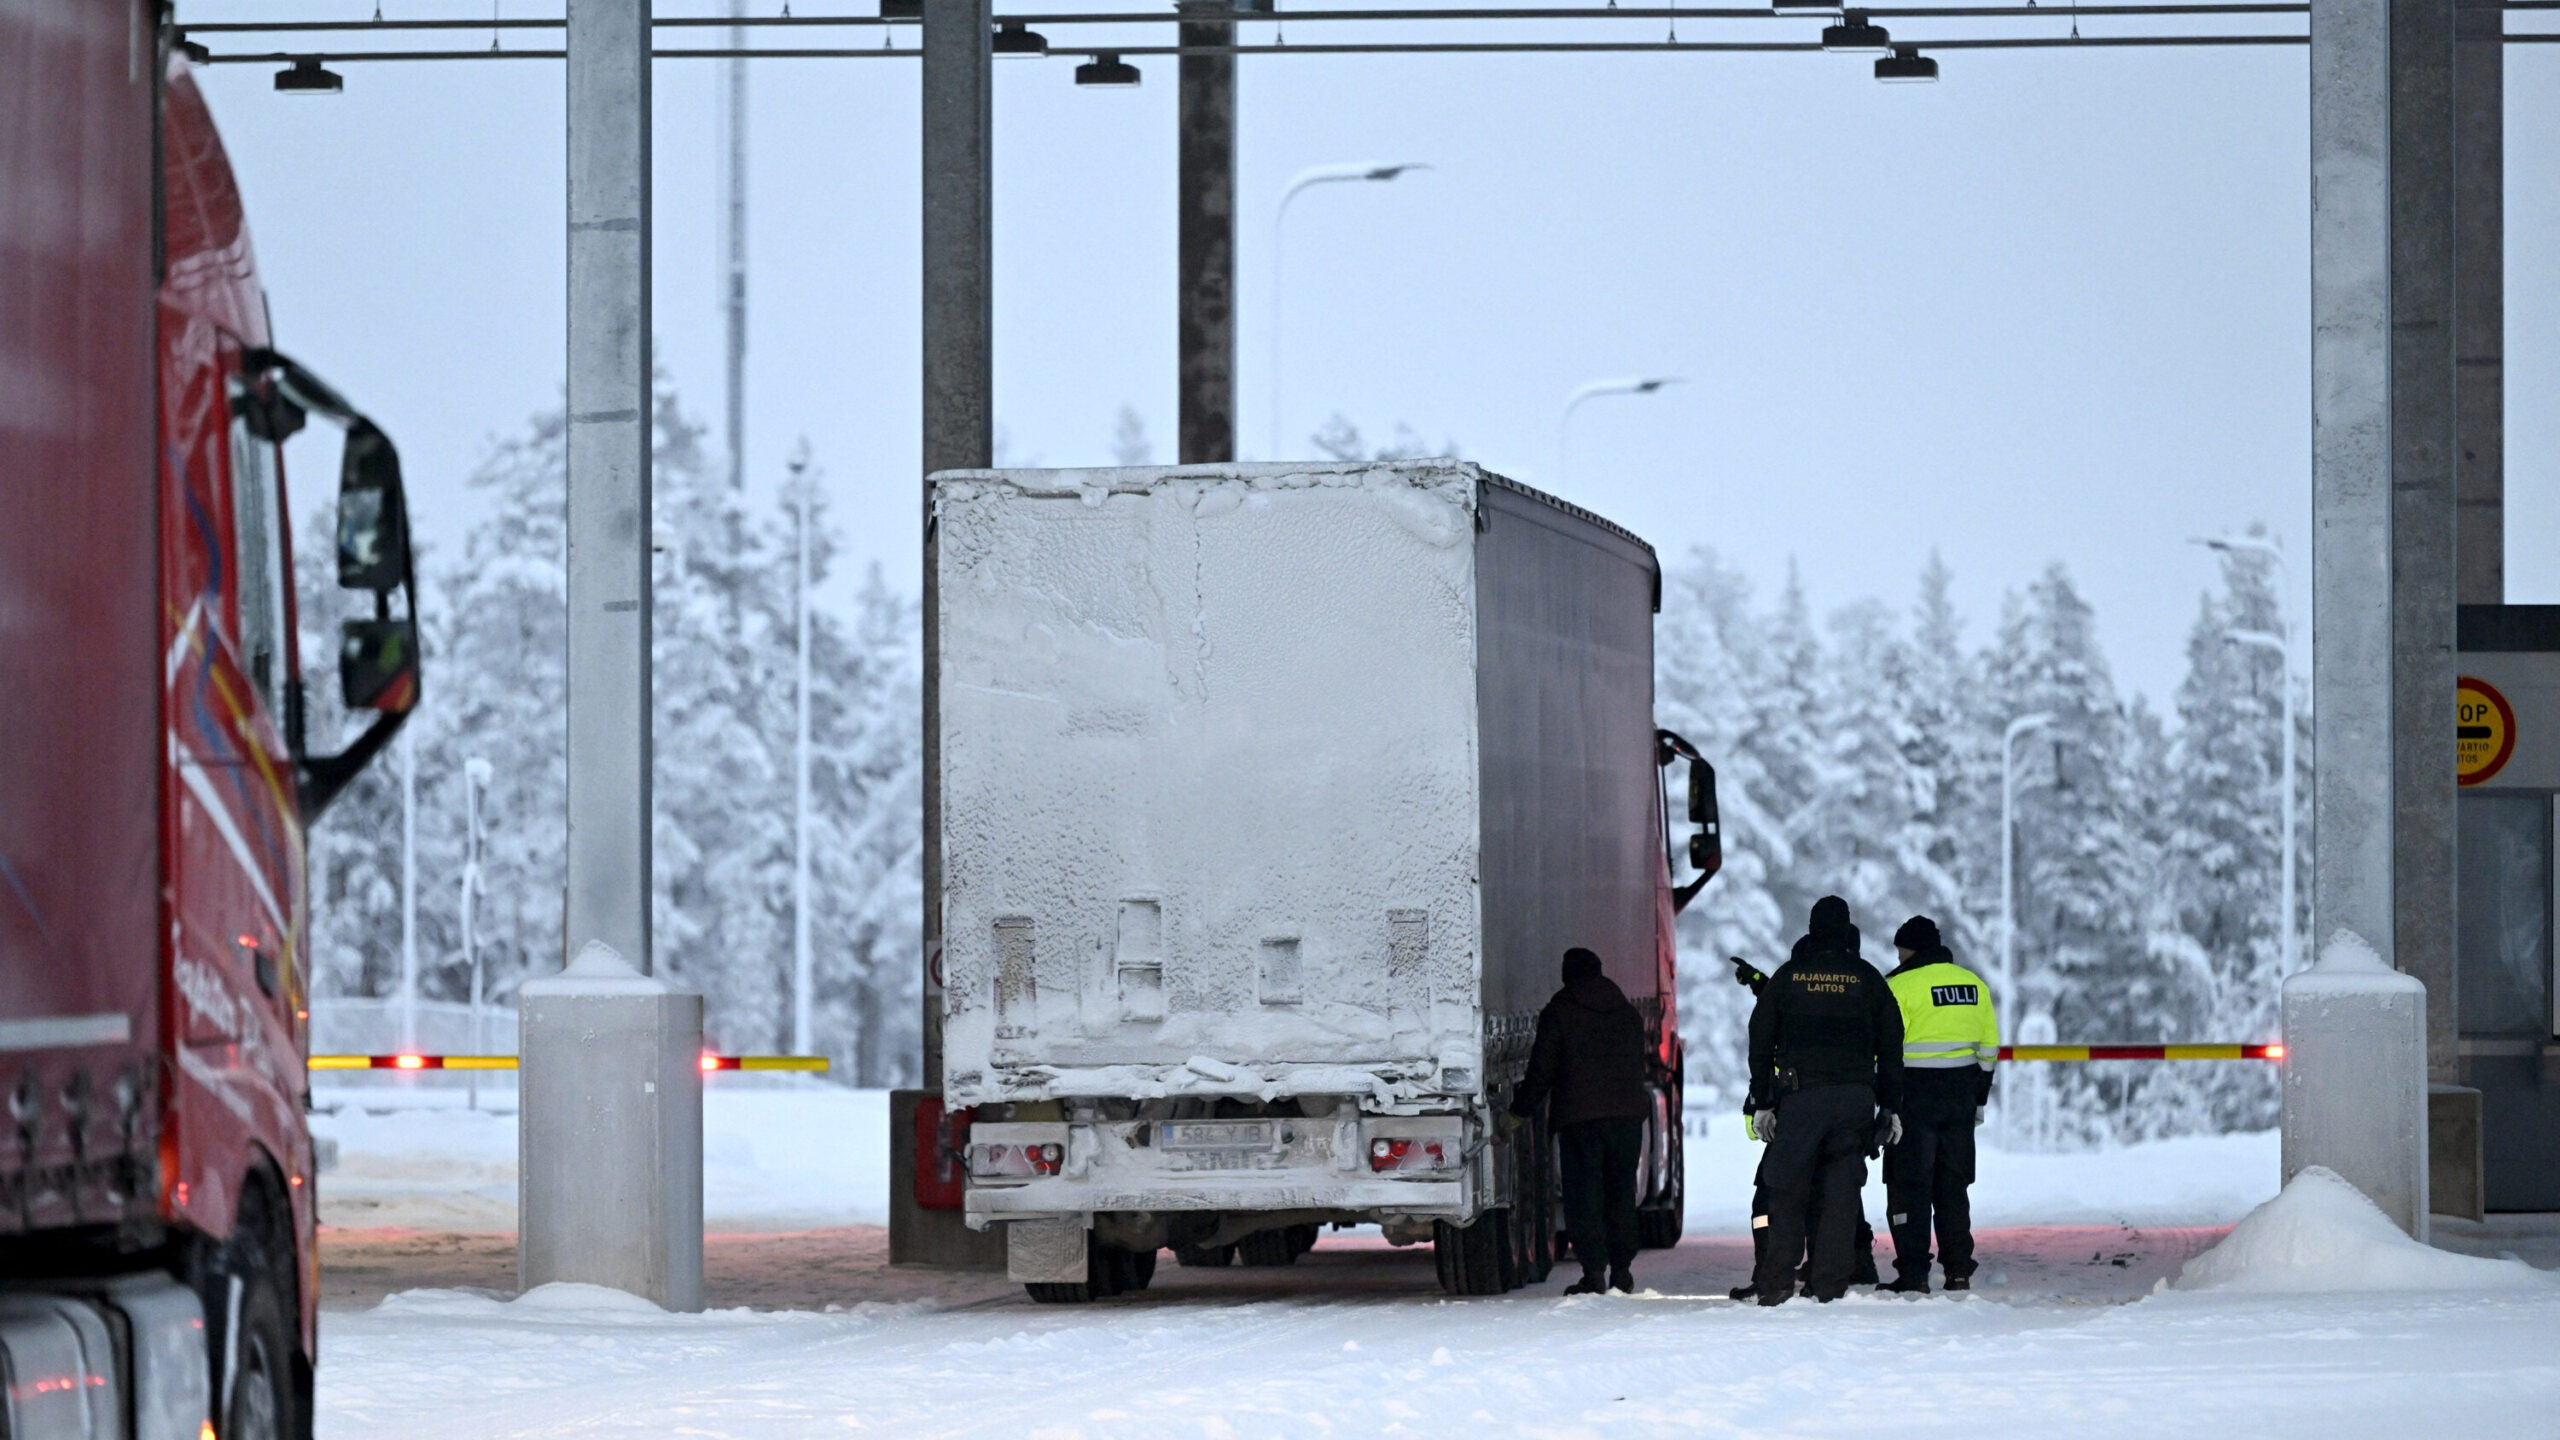 28finland russia wczv videoSixteenByNine3000 1 scaled - Finland to close last Operating Checkpoint